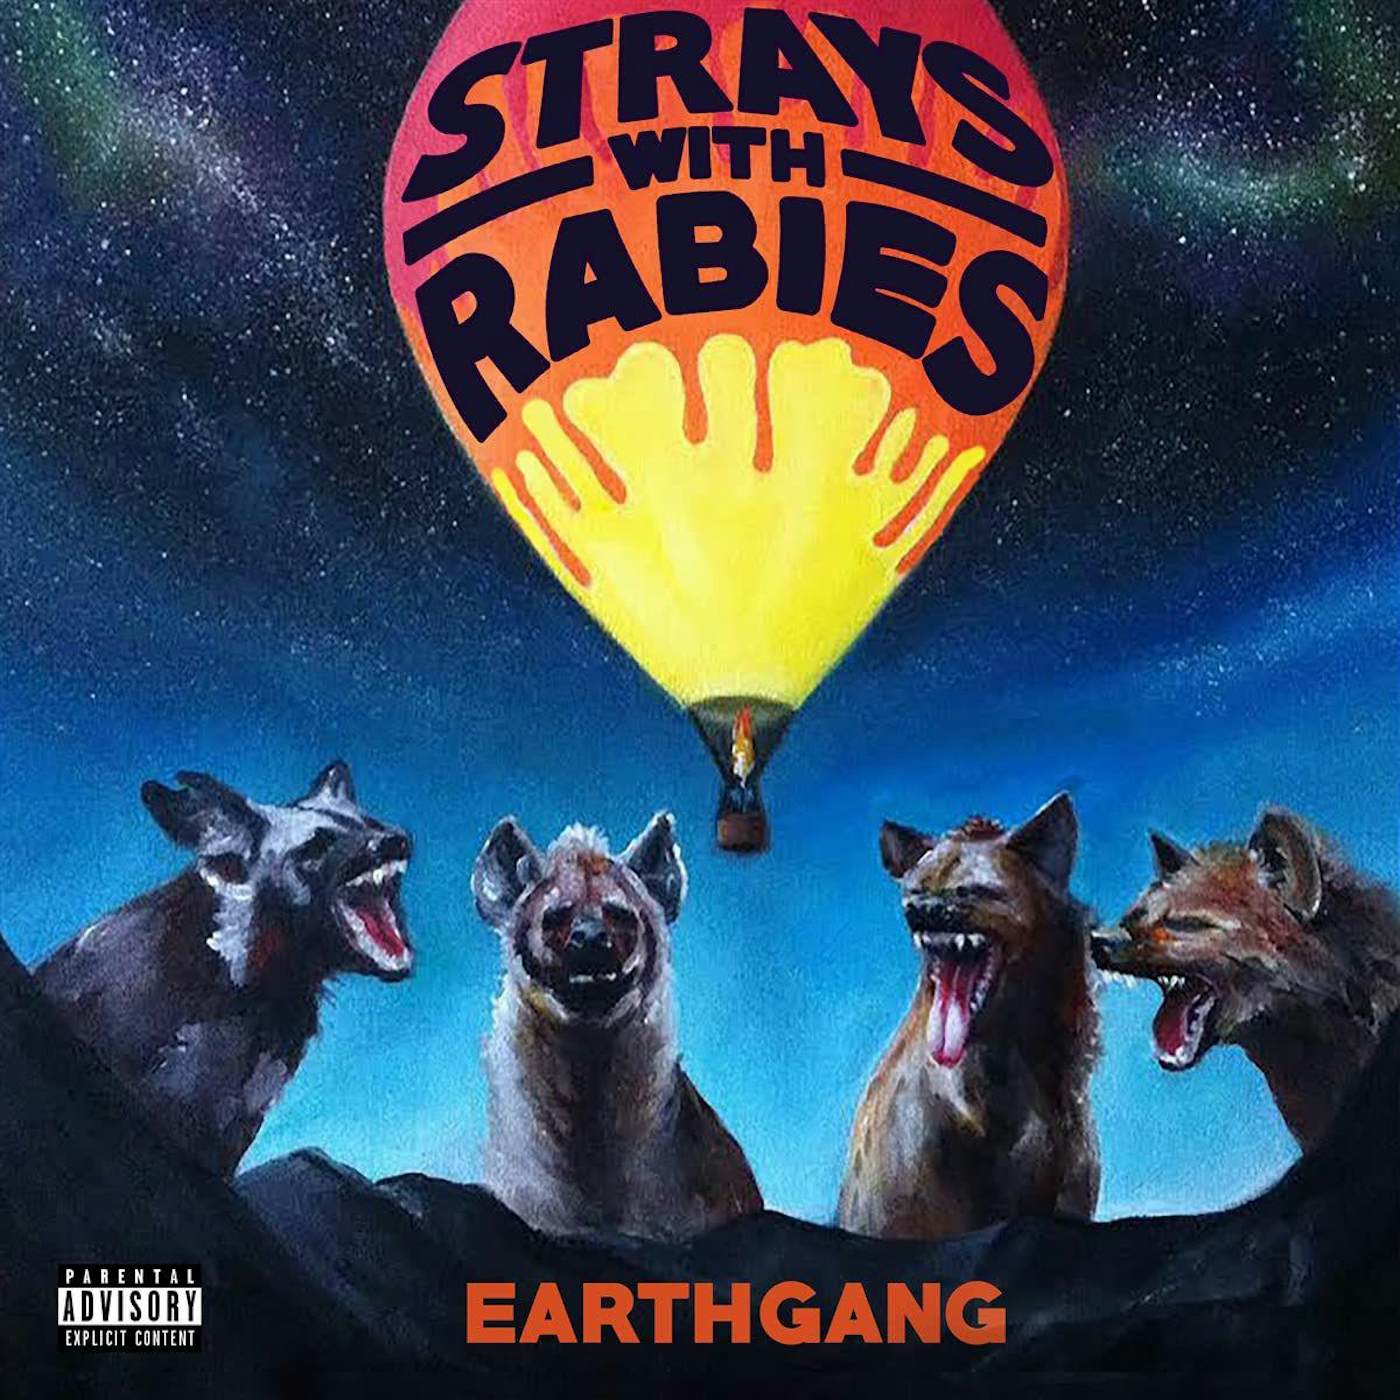 EARTHGANG Strays with Rabies Vinyl Record